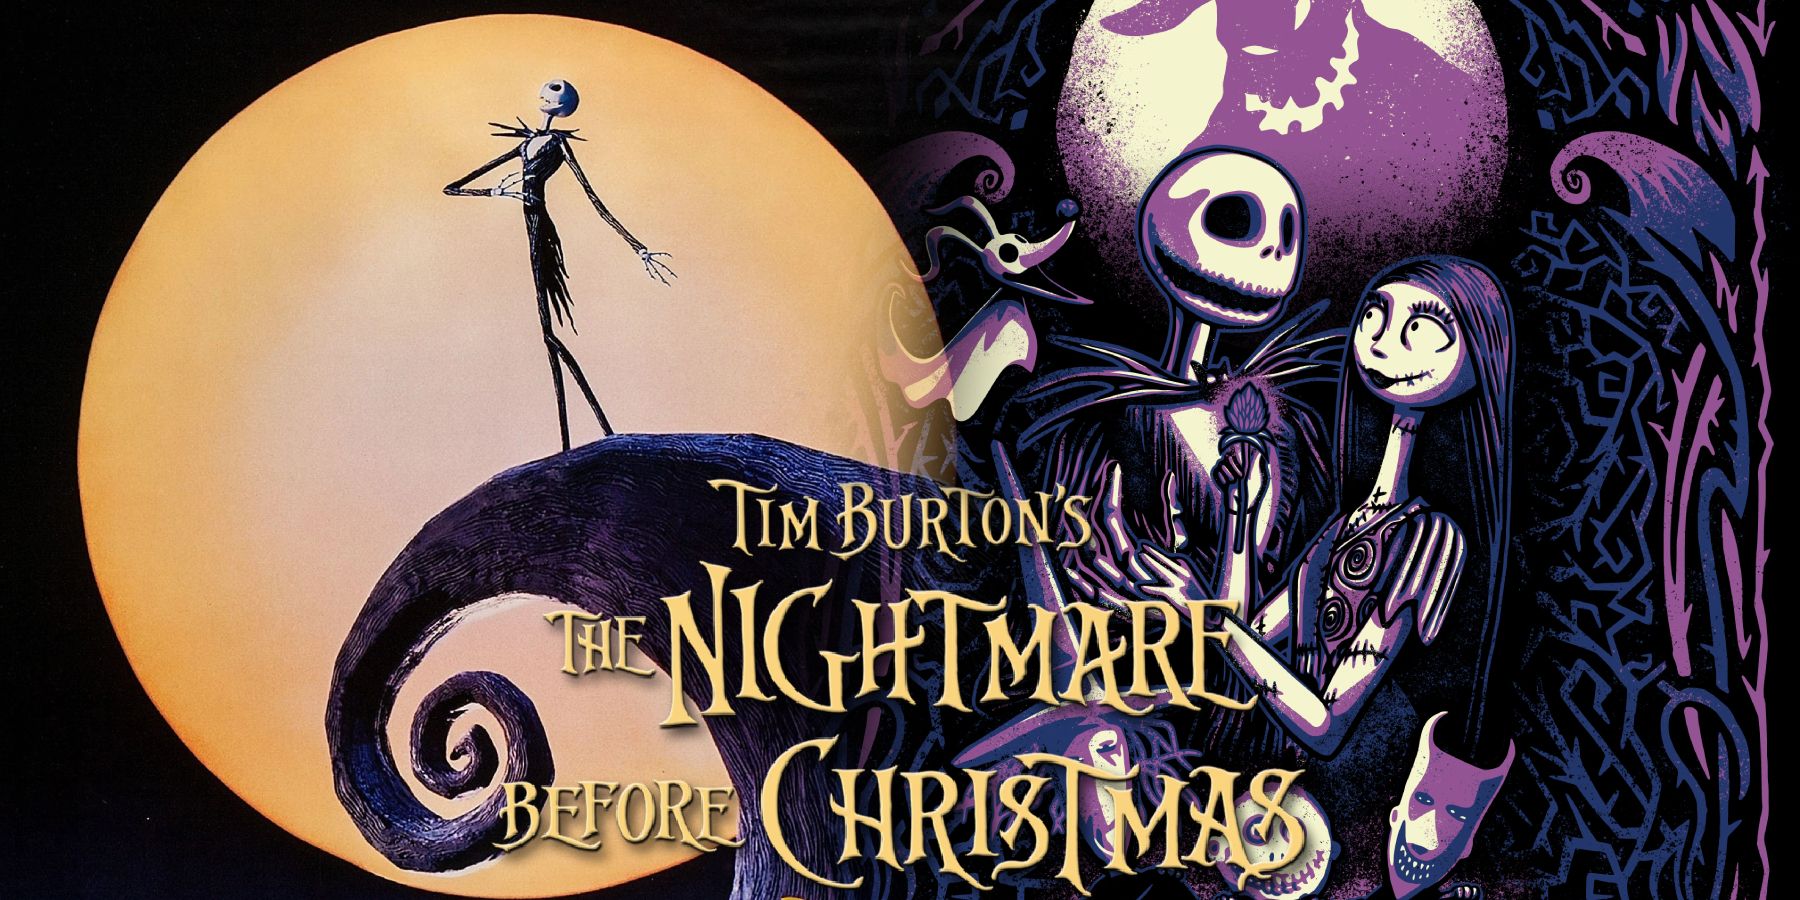 Cover of The Nightmare Before Christmas along with artwork for the 30th anniversary release